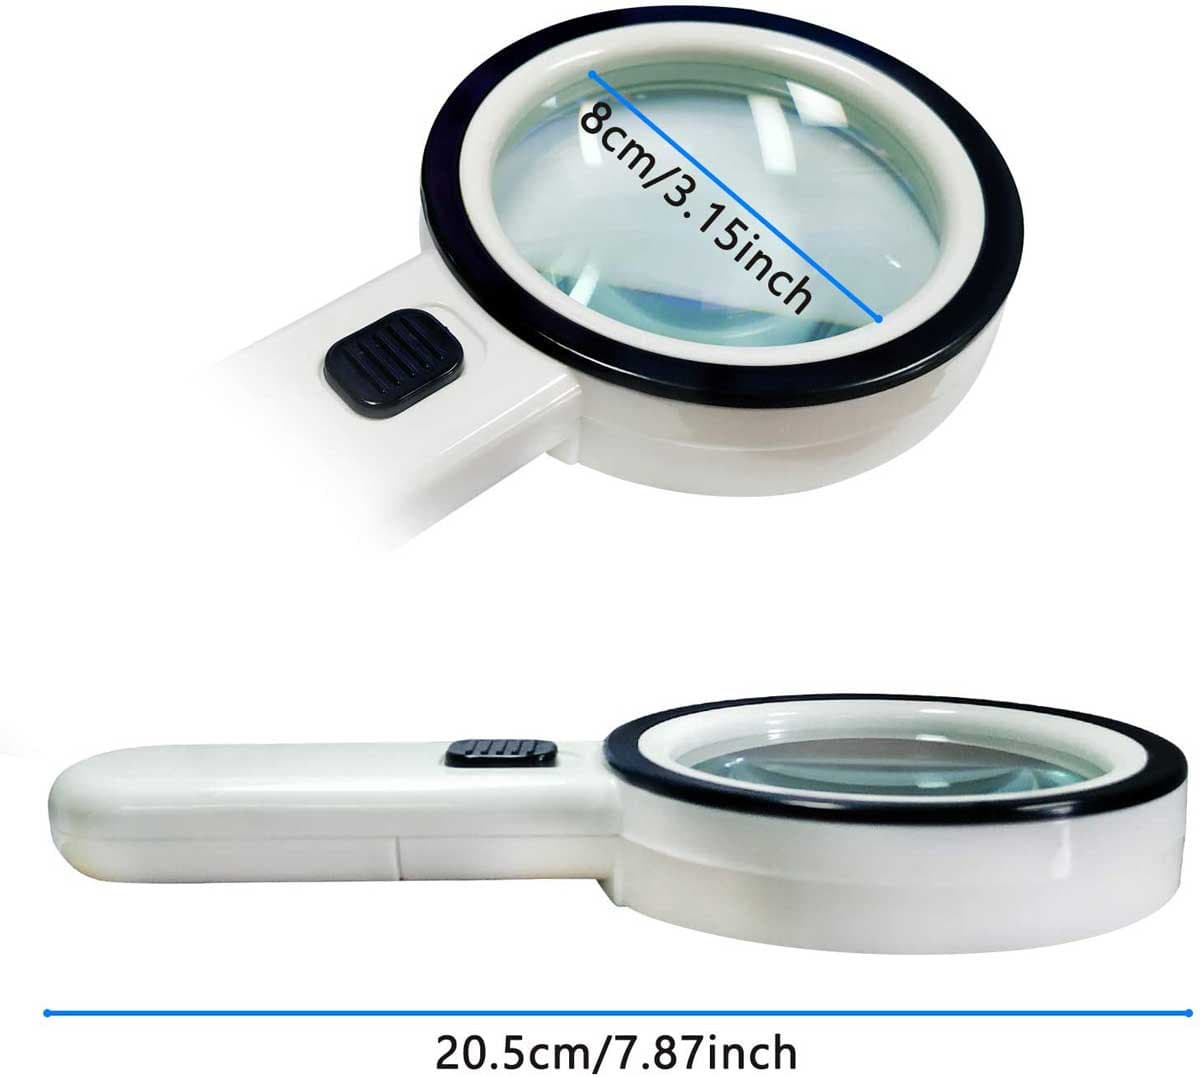 30X Portable Magnifying Glass Illuminated Magnifier Loupe